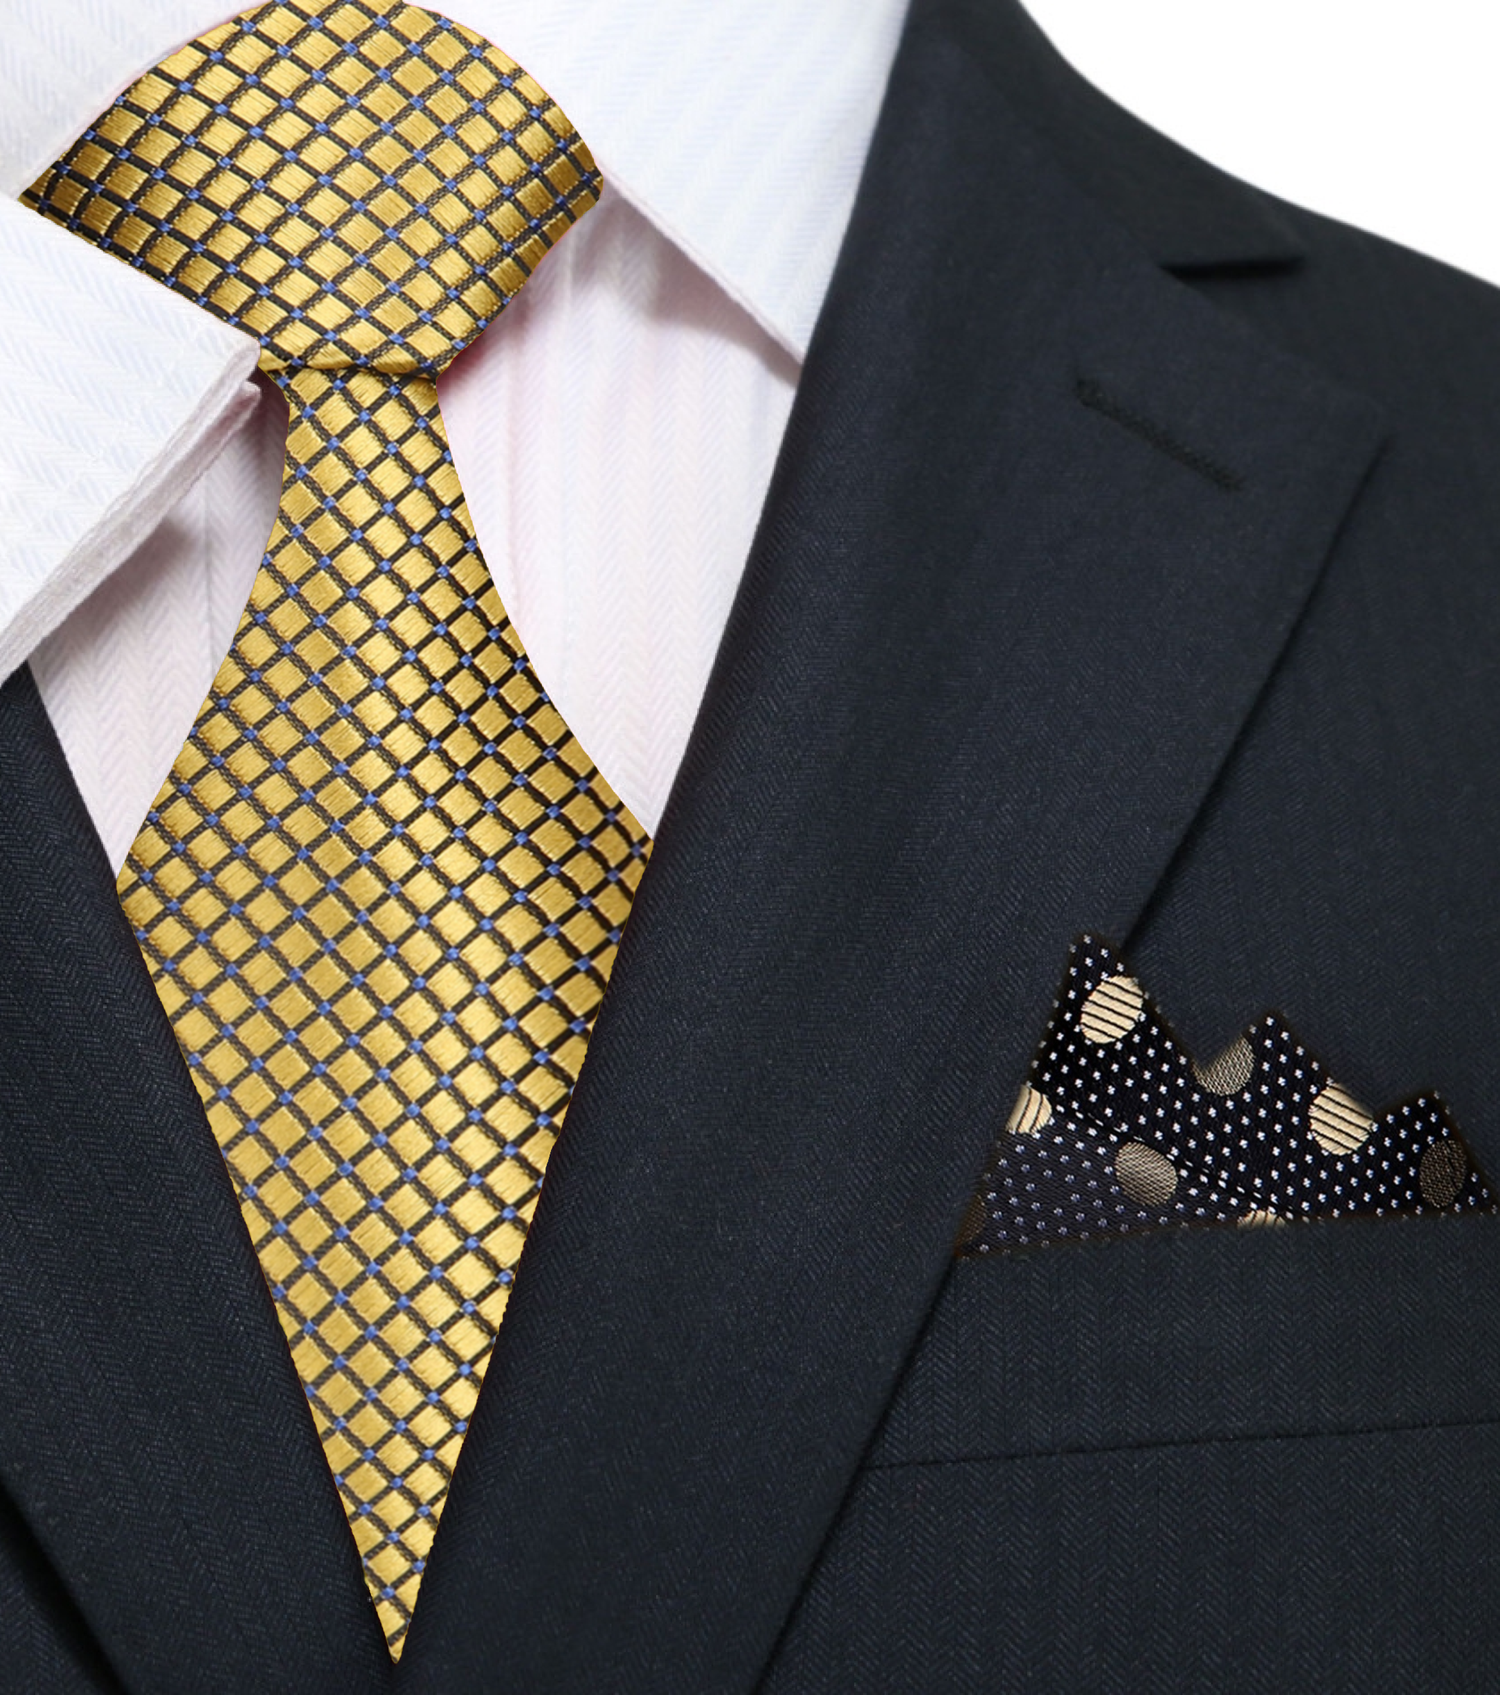 Main View: Gold Geometric Tie and Accenting Square